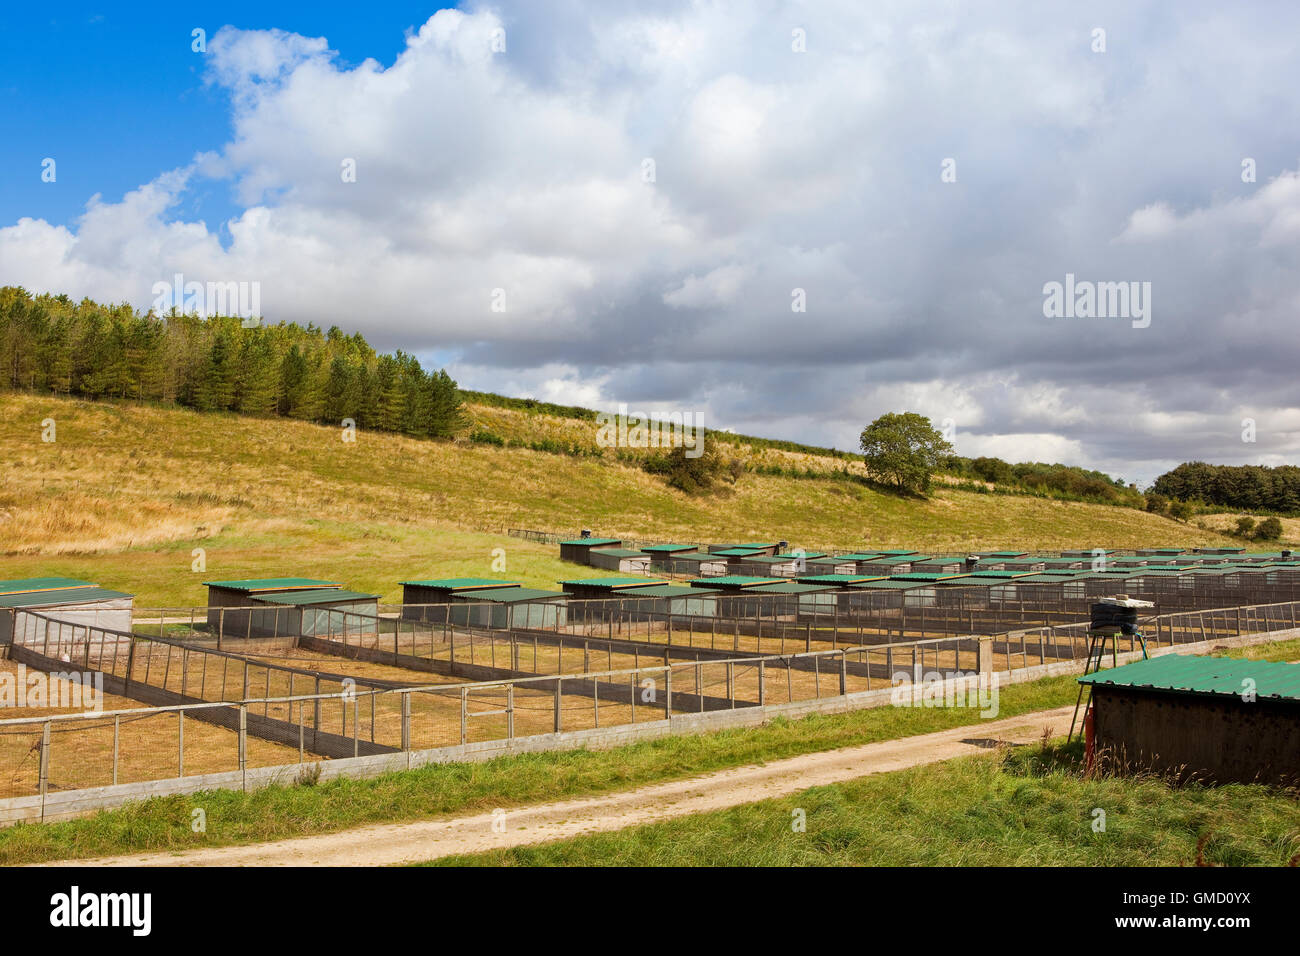 Game bird rearing pens in rural countryside under a blue cloudy sky in summer on the Yorkshire wolds. Stock Photo